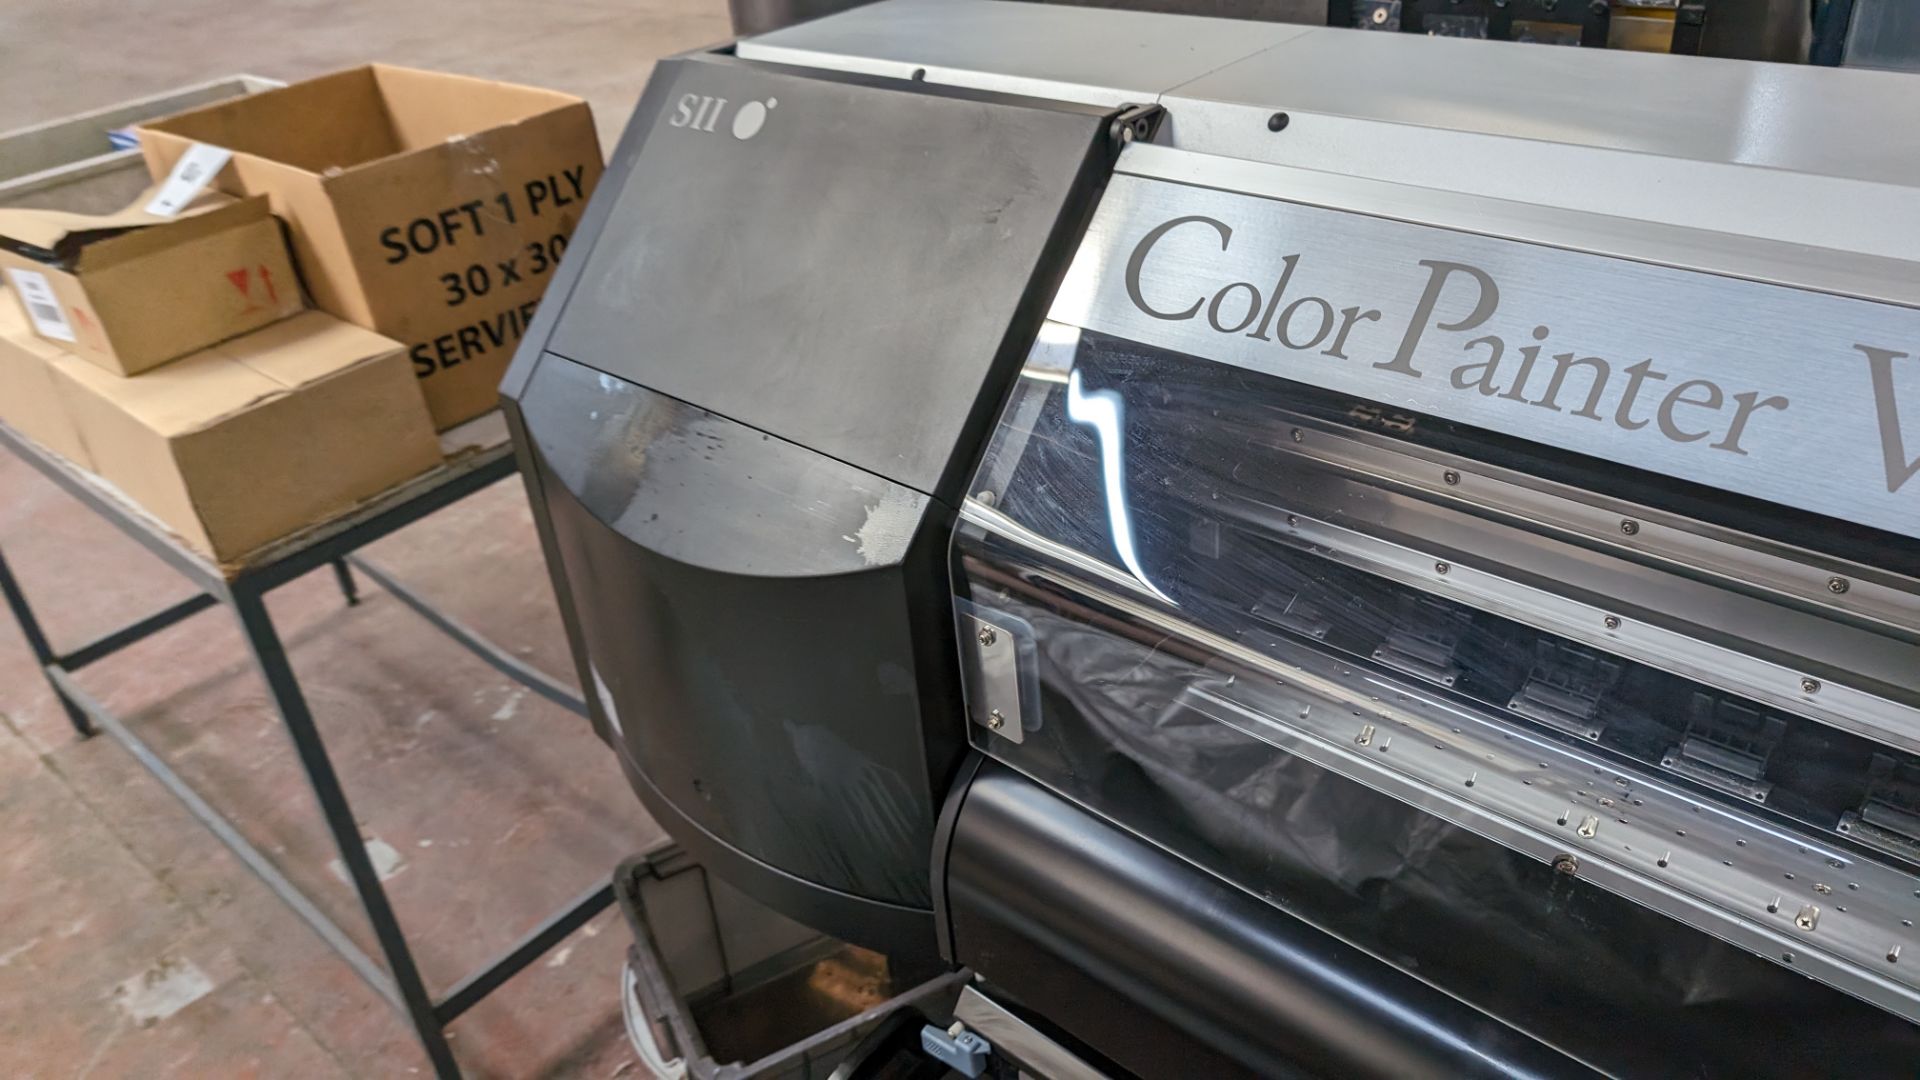 Sii Color Painter model W-64S wide format printer, approximately 34" capacity, with motorised take-u - Image 11 of 22